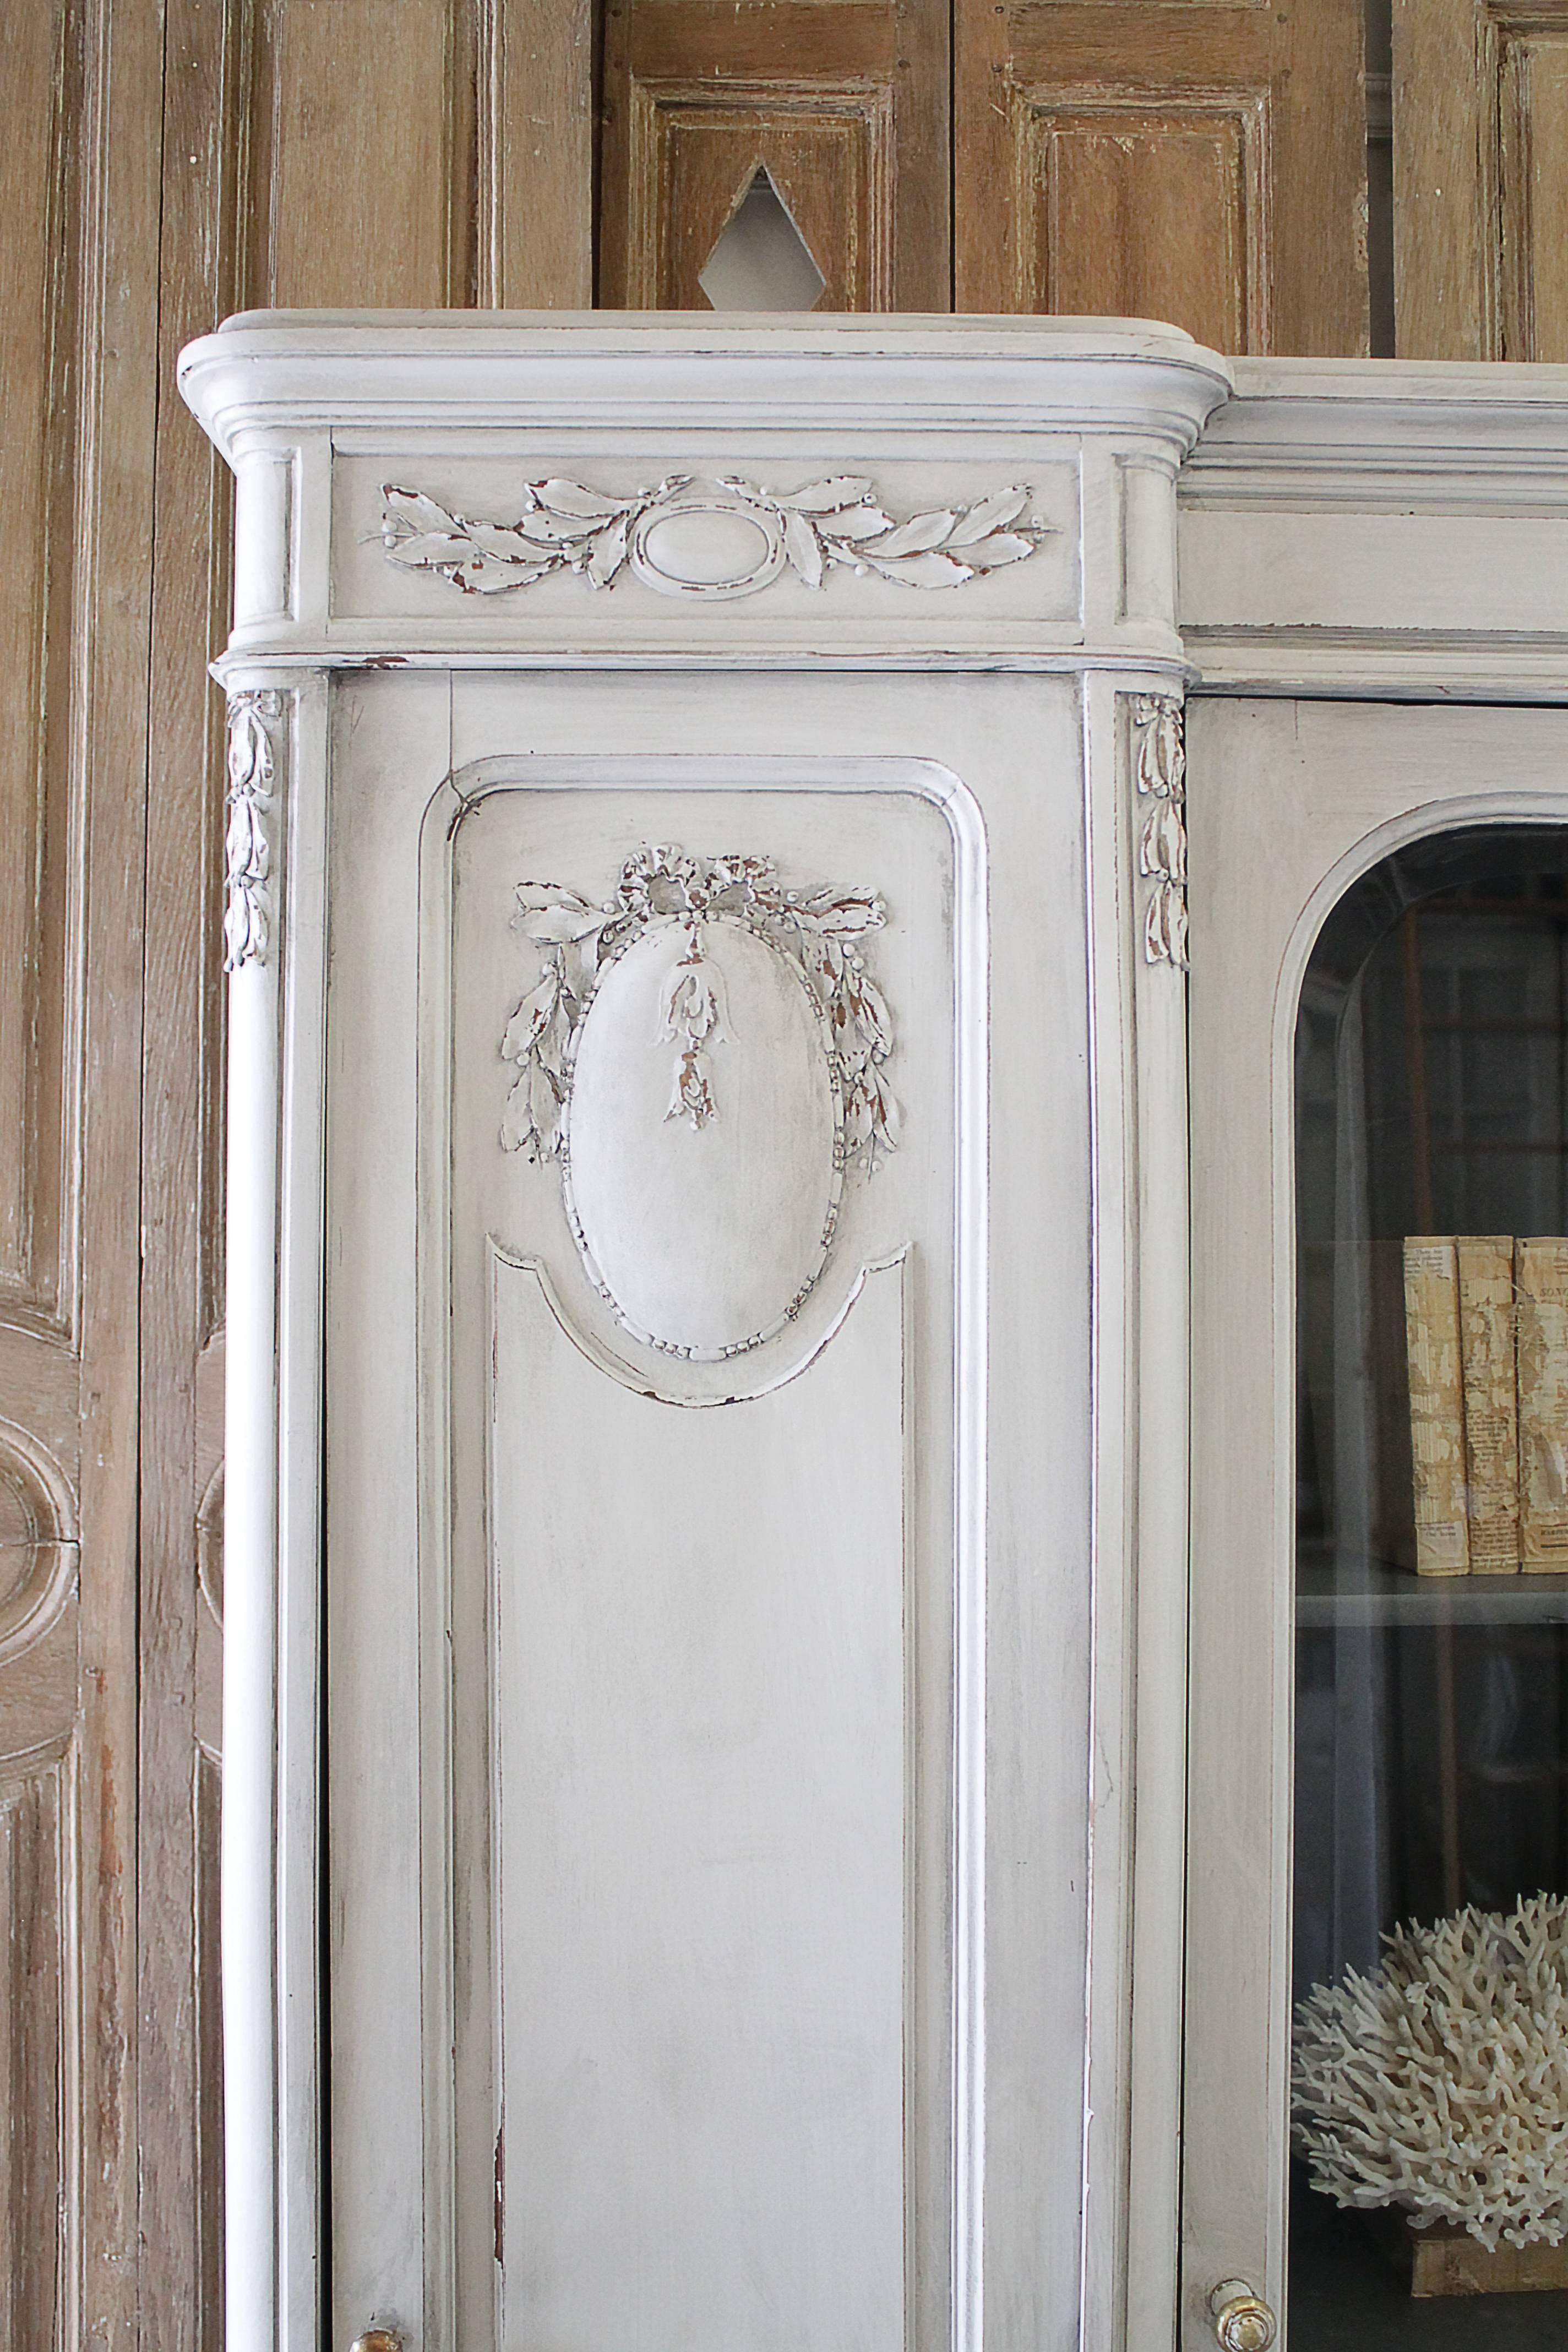 Beautiful early 20th century French style painted and carved display armoire. Three doors, the center door is a glass door to display, with adjustable shelves and one shelf has two drawers that open and close with ease.
The two side doors open up